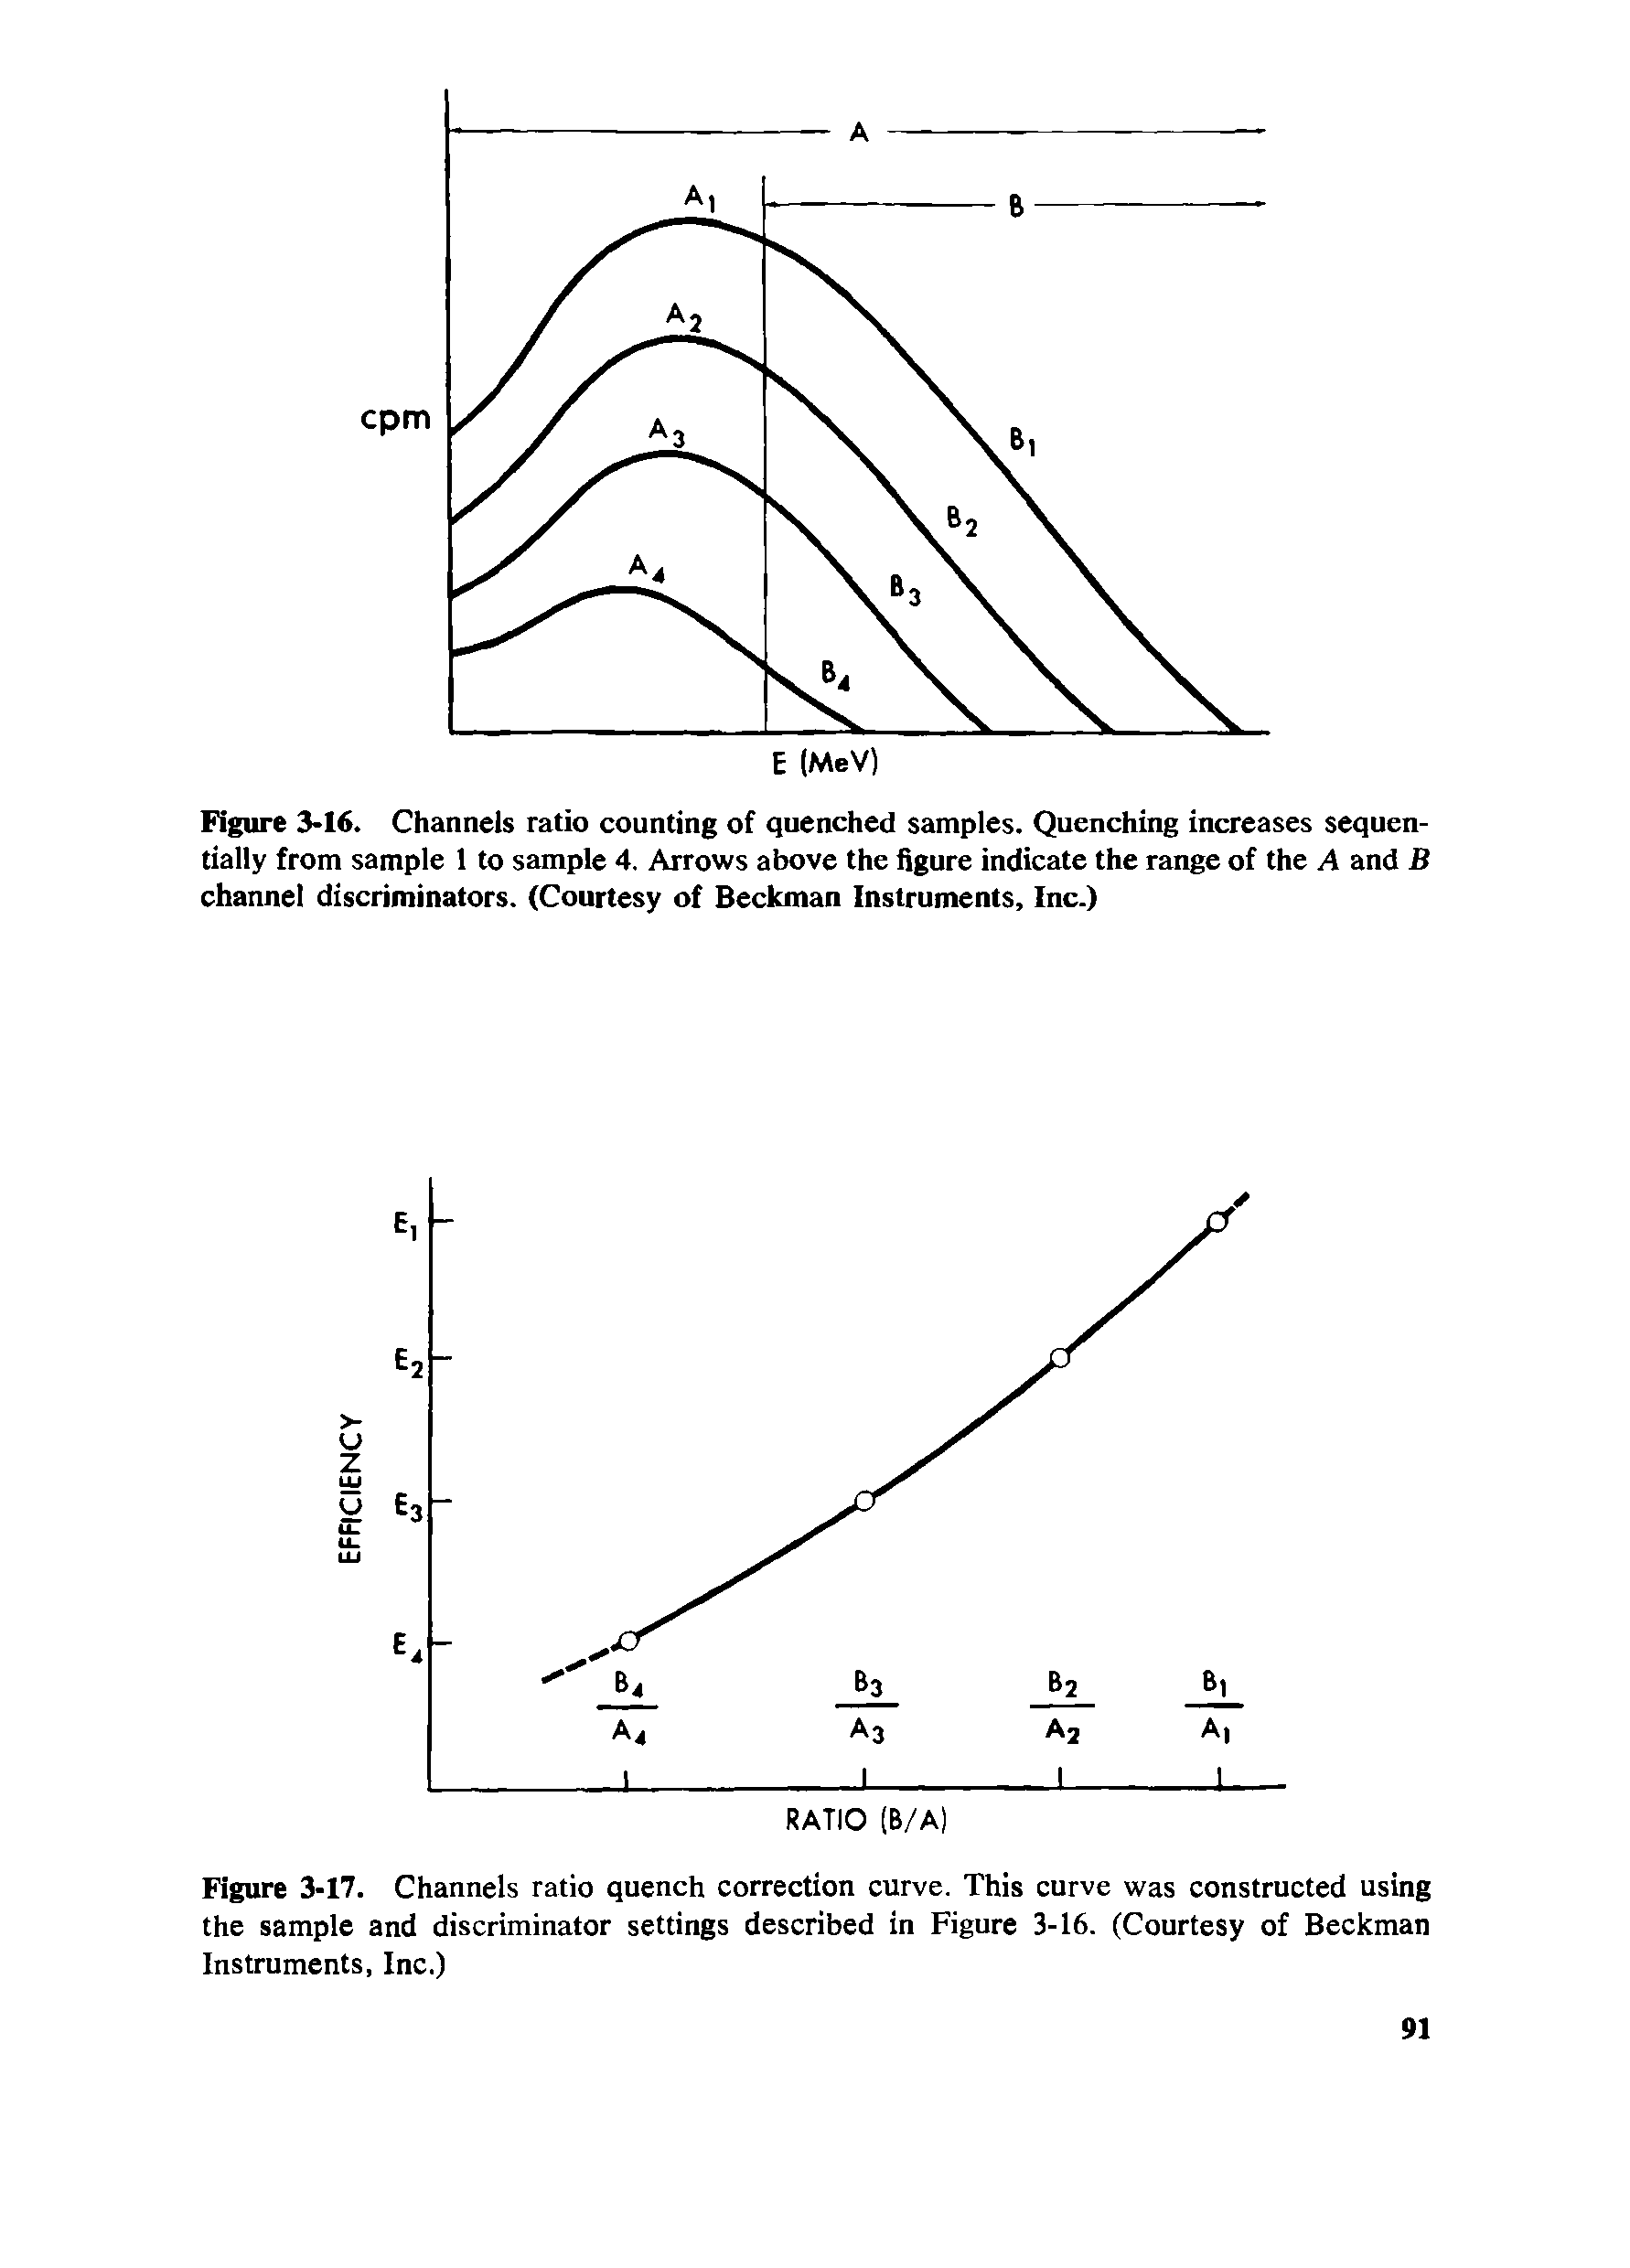 Figure 3-16. Channels ratio counting of quenched samples. Quenching increases sequentially from sample 1 to sample 4. Arrows above the figure indicate the range of the A and B channel discriminators. (Courtesy of Beckman Instruments, Inc.)...